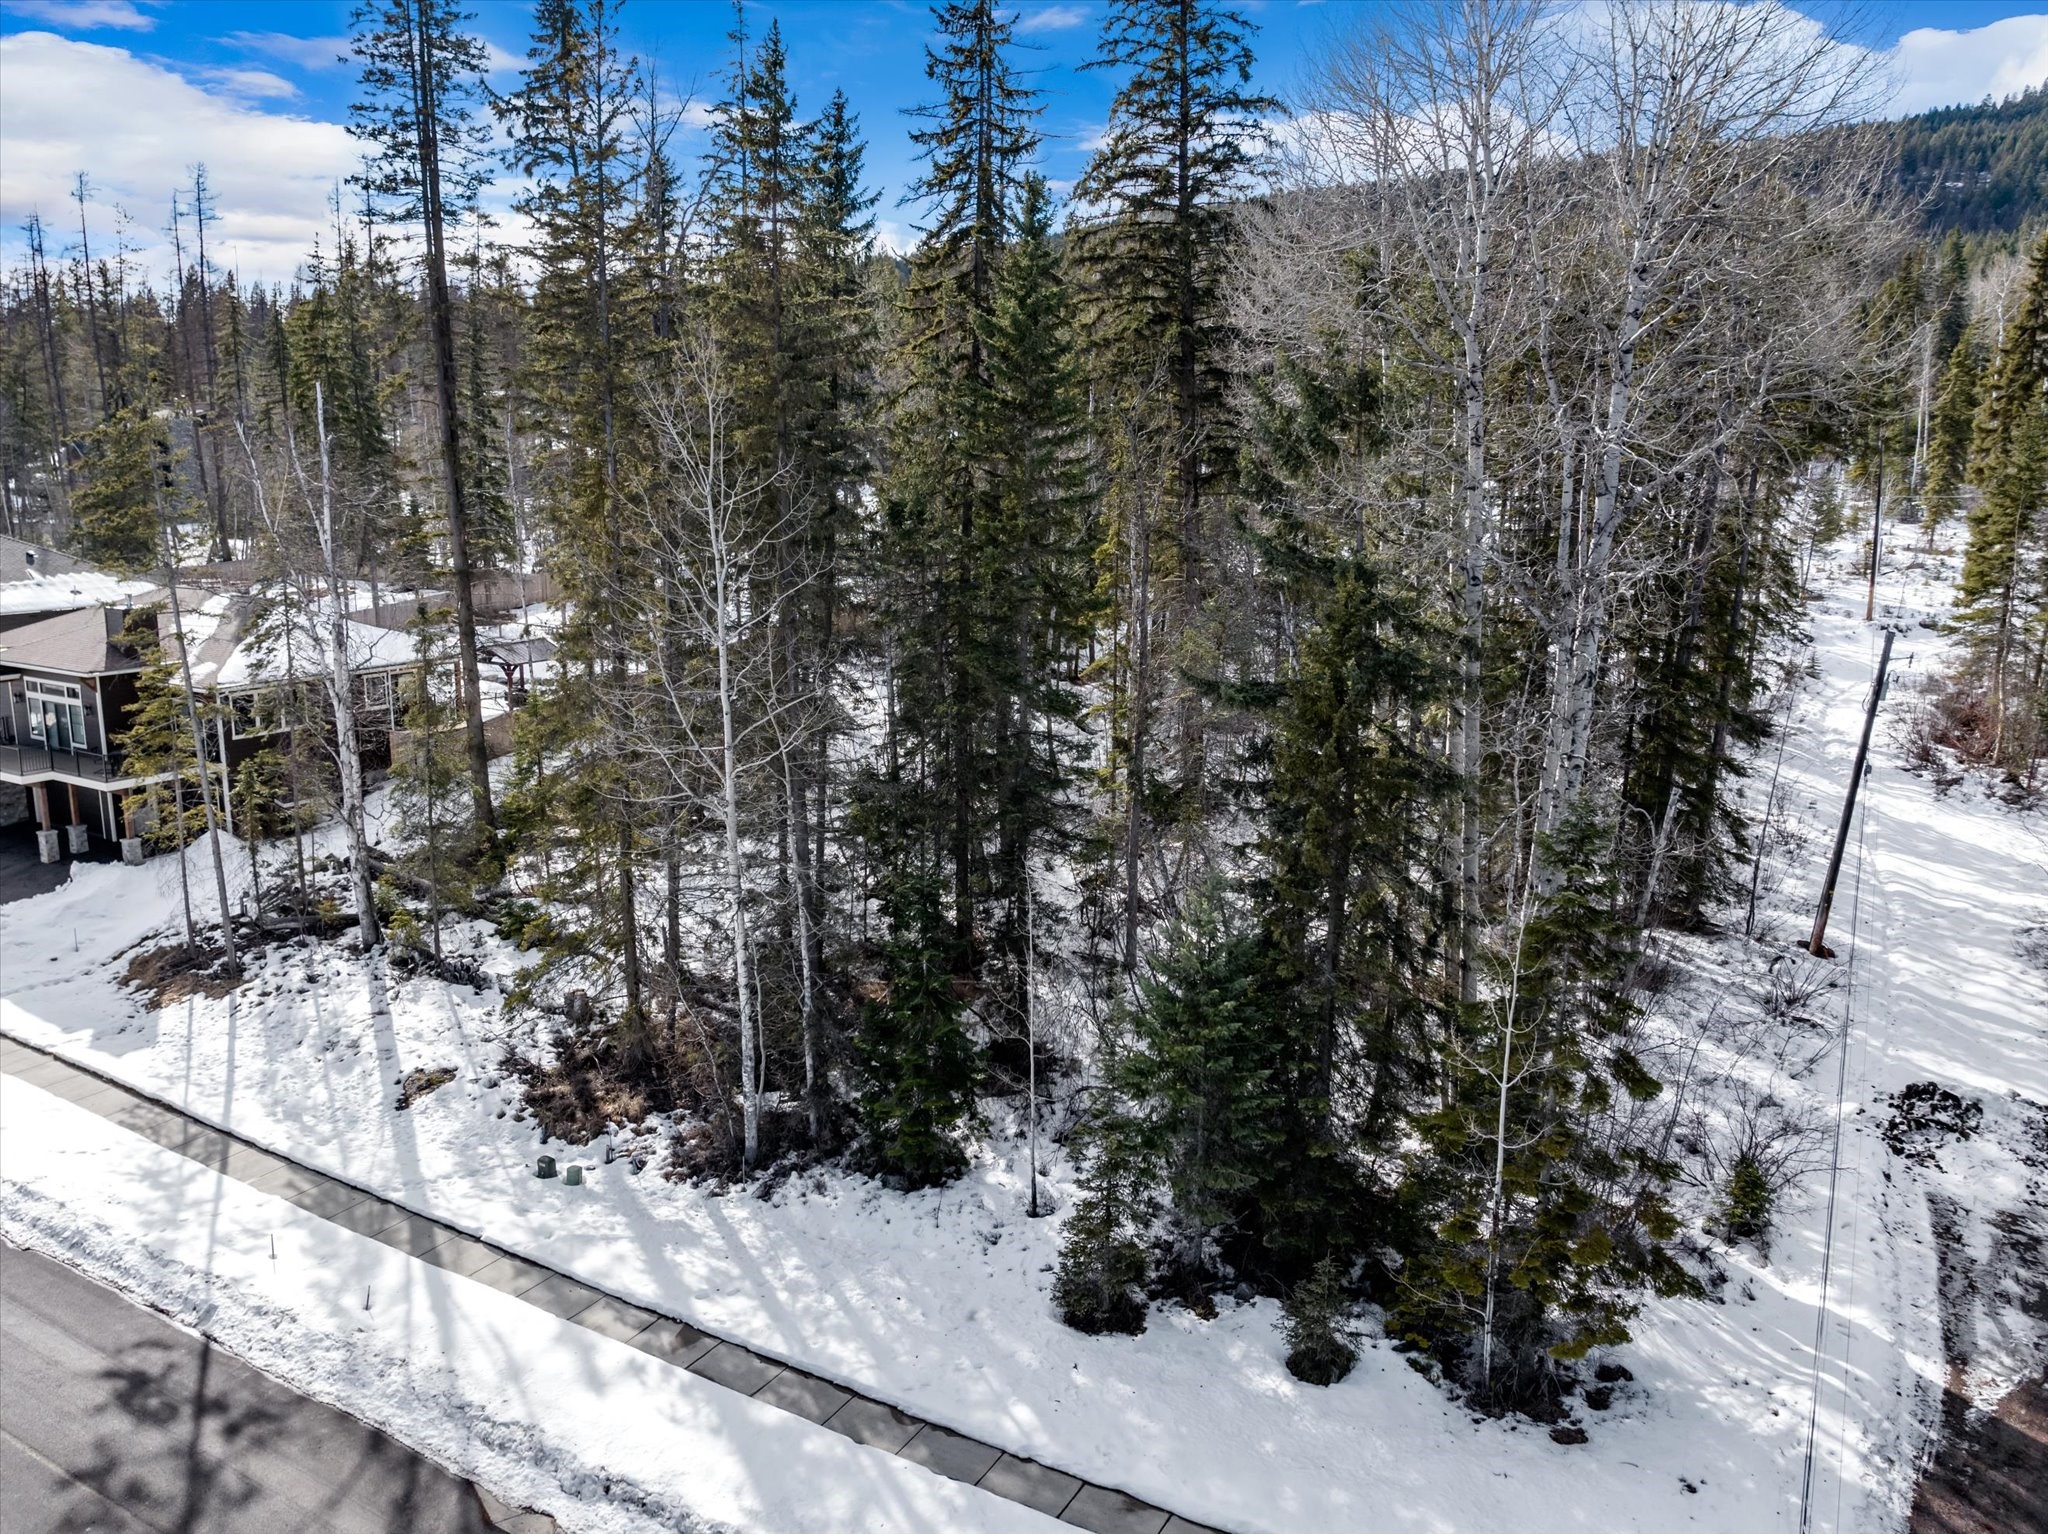 CORNER LOT AT THE END OF A QUIET STREET! Build your dream home on this gently sloping lot in an established neighborhood. Icehouse Road has great views of the ski resort. Walking distance to lake access at Whitefish State Park, close to Whitefish Trails and the Whitefish Lake Golf Course.  This lot is actually larger than advertised due to the City of Whitefish deciding not to add a street at the back portion of the property.  Please see private remarks and documents for further details. Please call Derreck Thompson (406) 261-8431 or your real estate professional for more details.